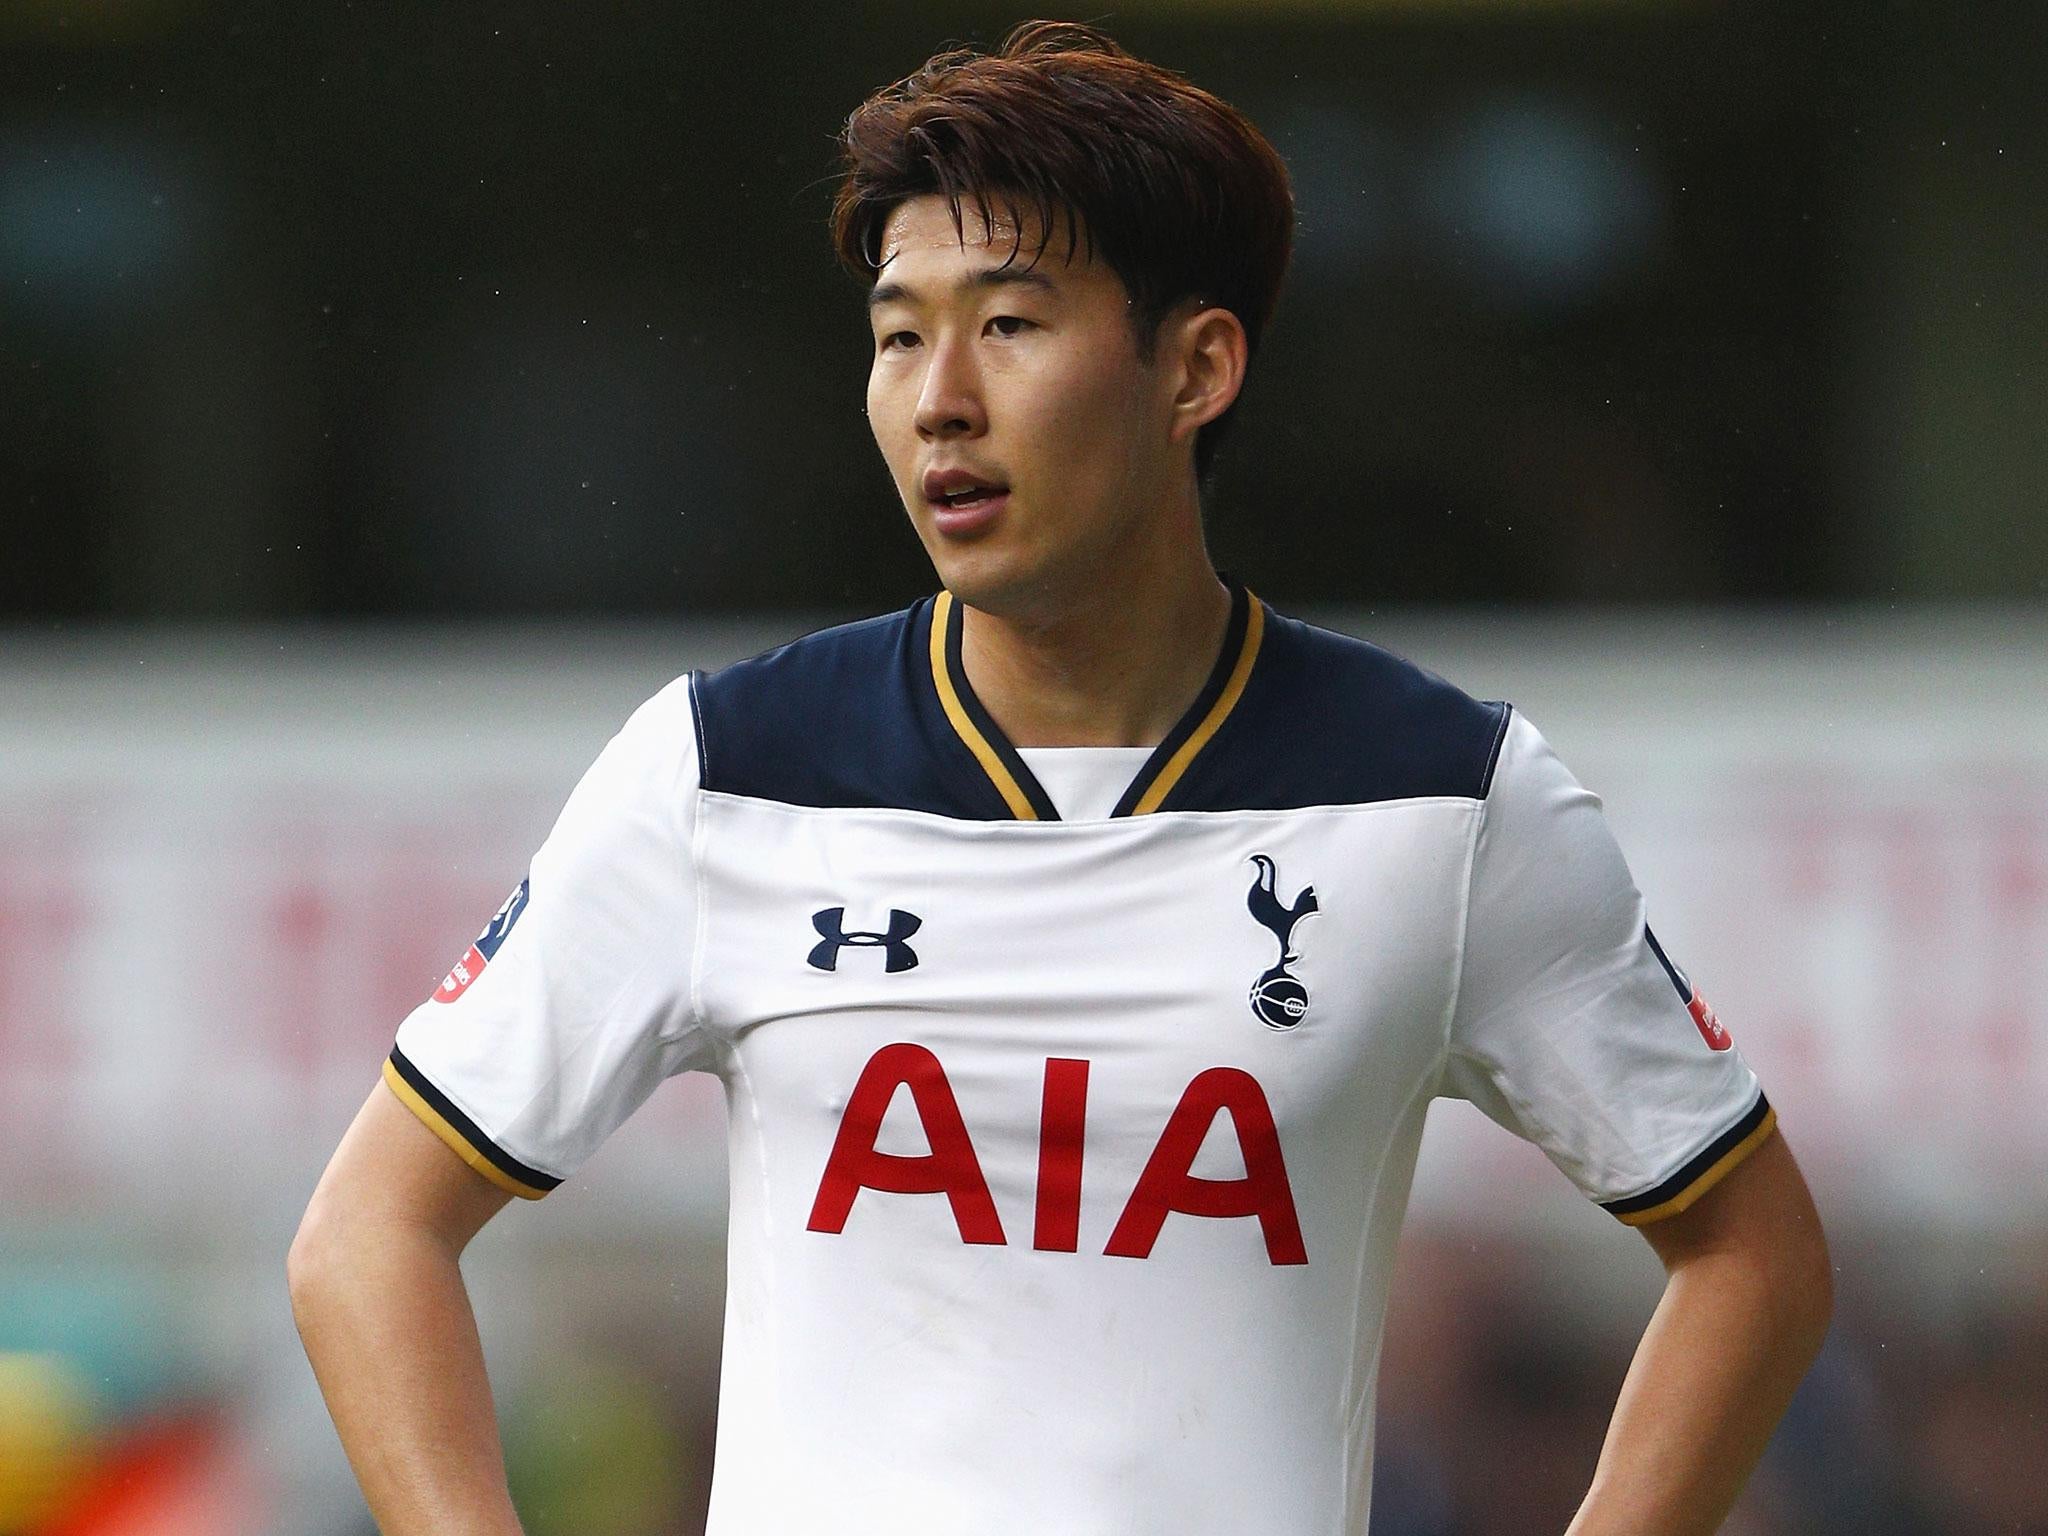 Son Heung-min was targeted with racial abuse from members of the Millwall support